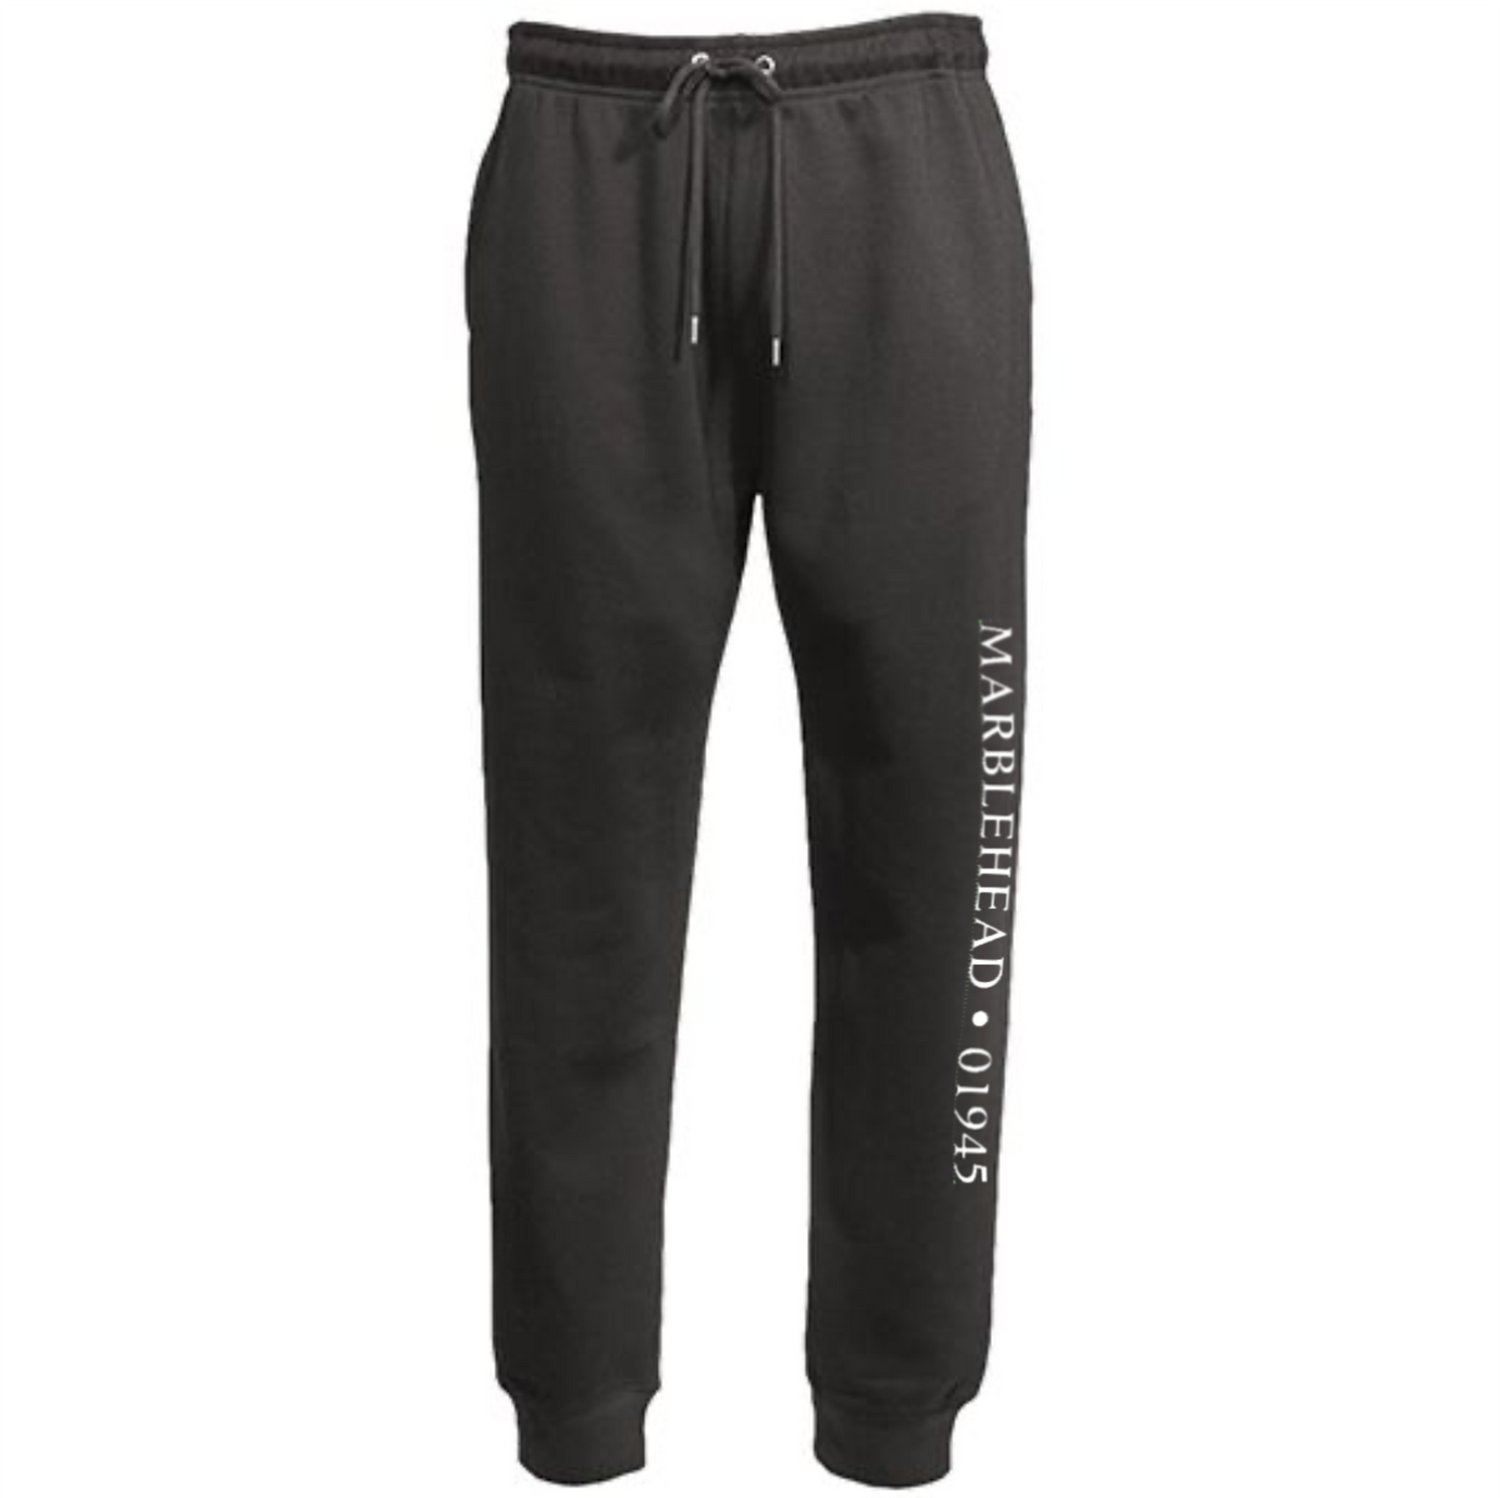 Marblehead Locale Classic Joggers